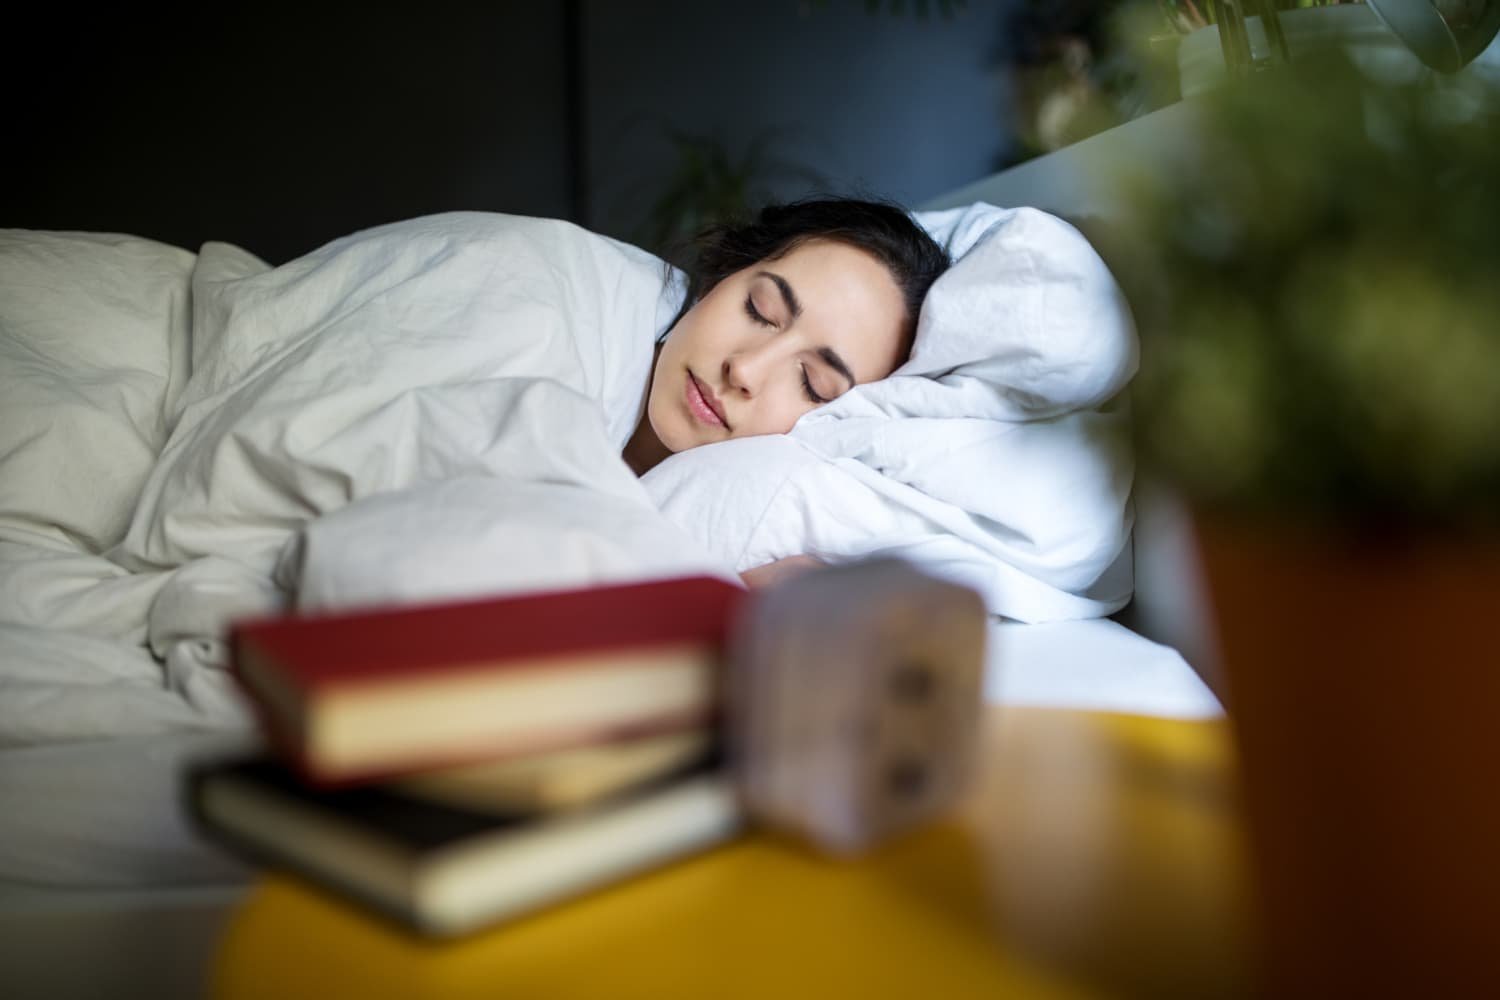 8 Genius Sleep Ideas That Mental Health Pros Give Their Most Anxious Patients